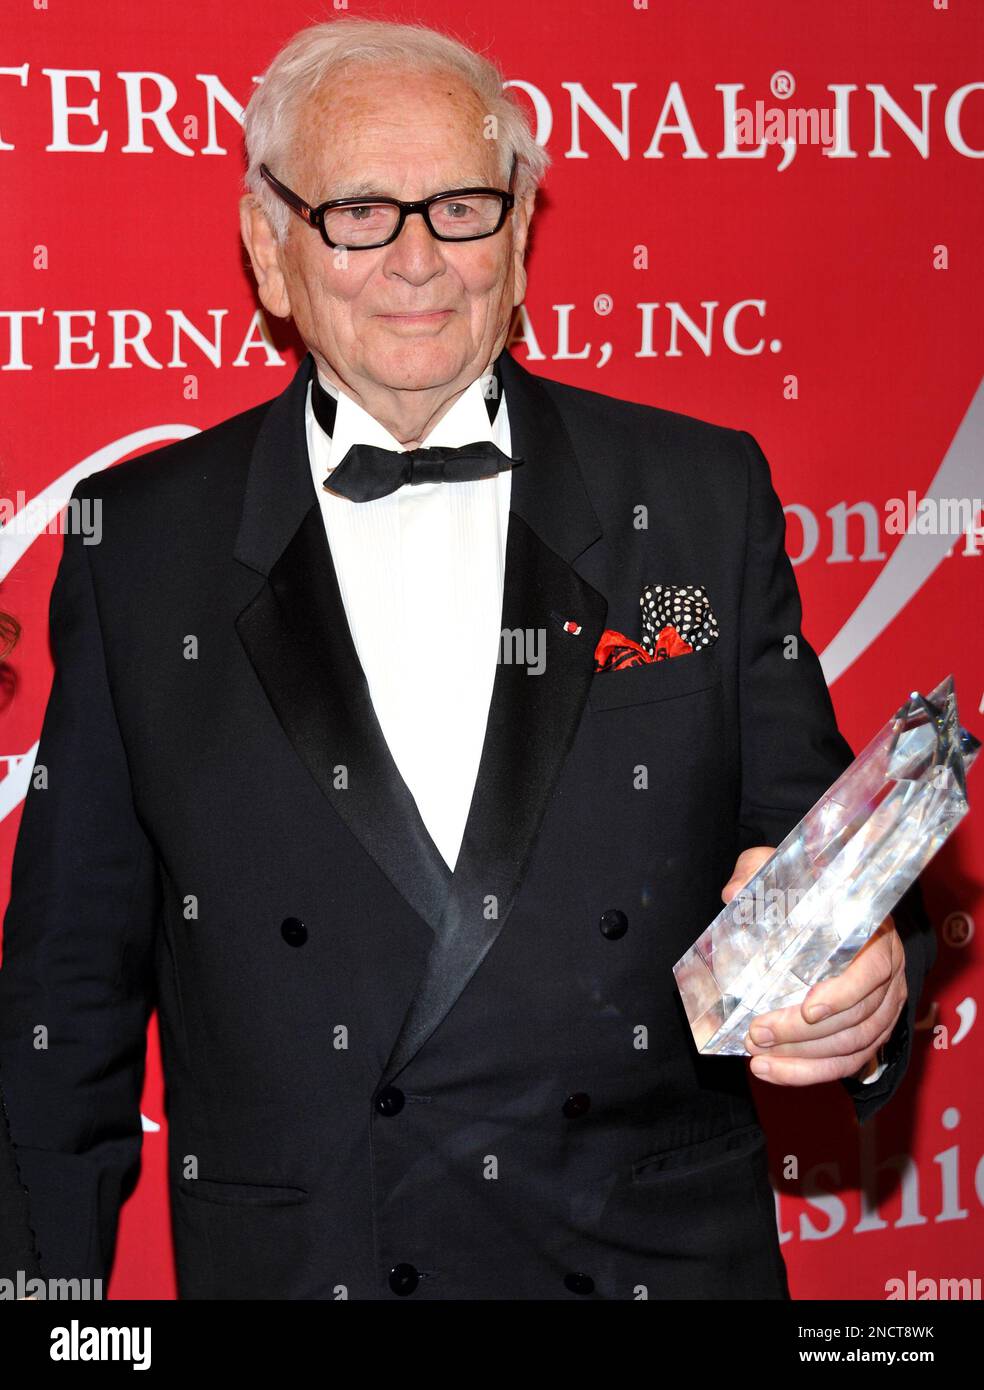 Board of Directors Legend Award honoree Pierre Cardin attends Fashion Group  International's 'Night of Stars' award ceremony at Cipriani's Wall Street  on Thursday, Oct. 28, 2010 in New York. (AP Photo/Evan Agostini